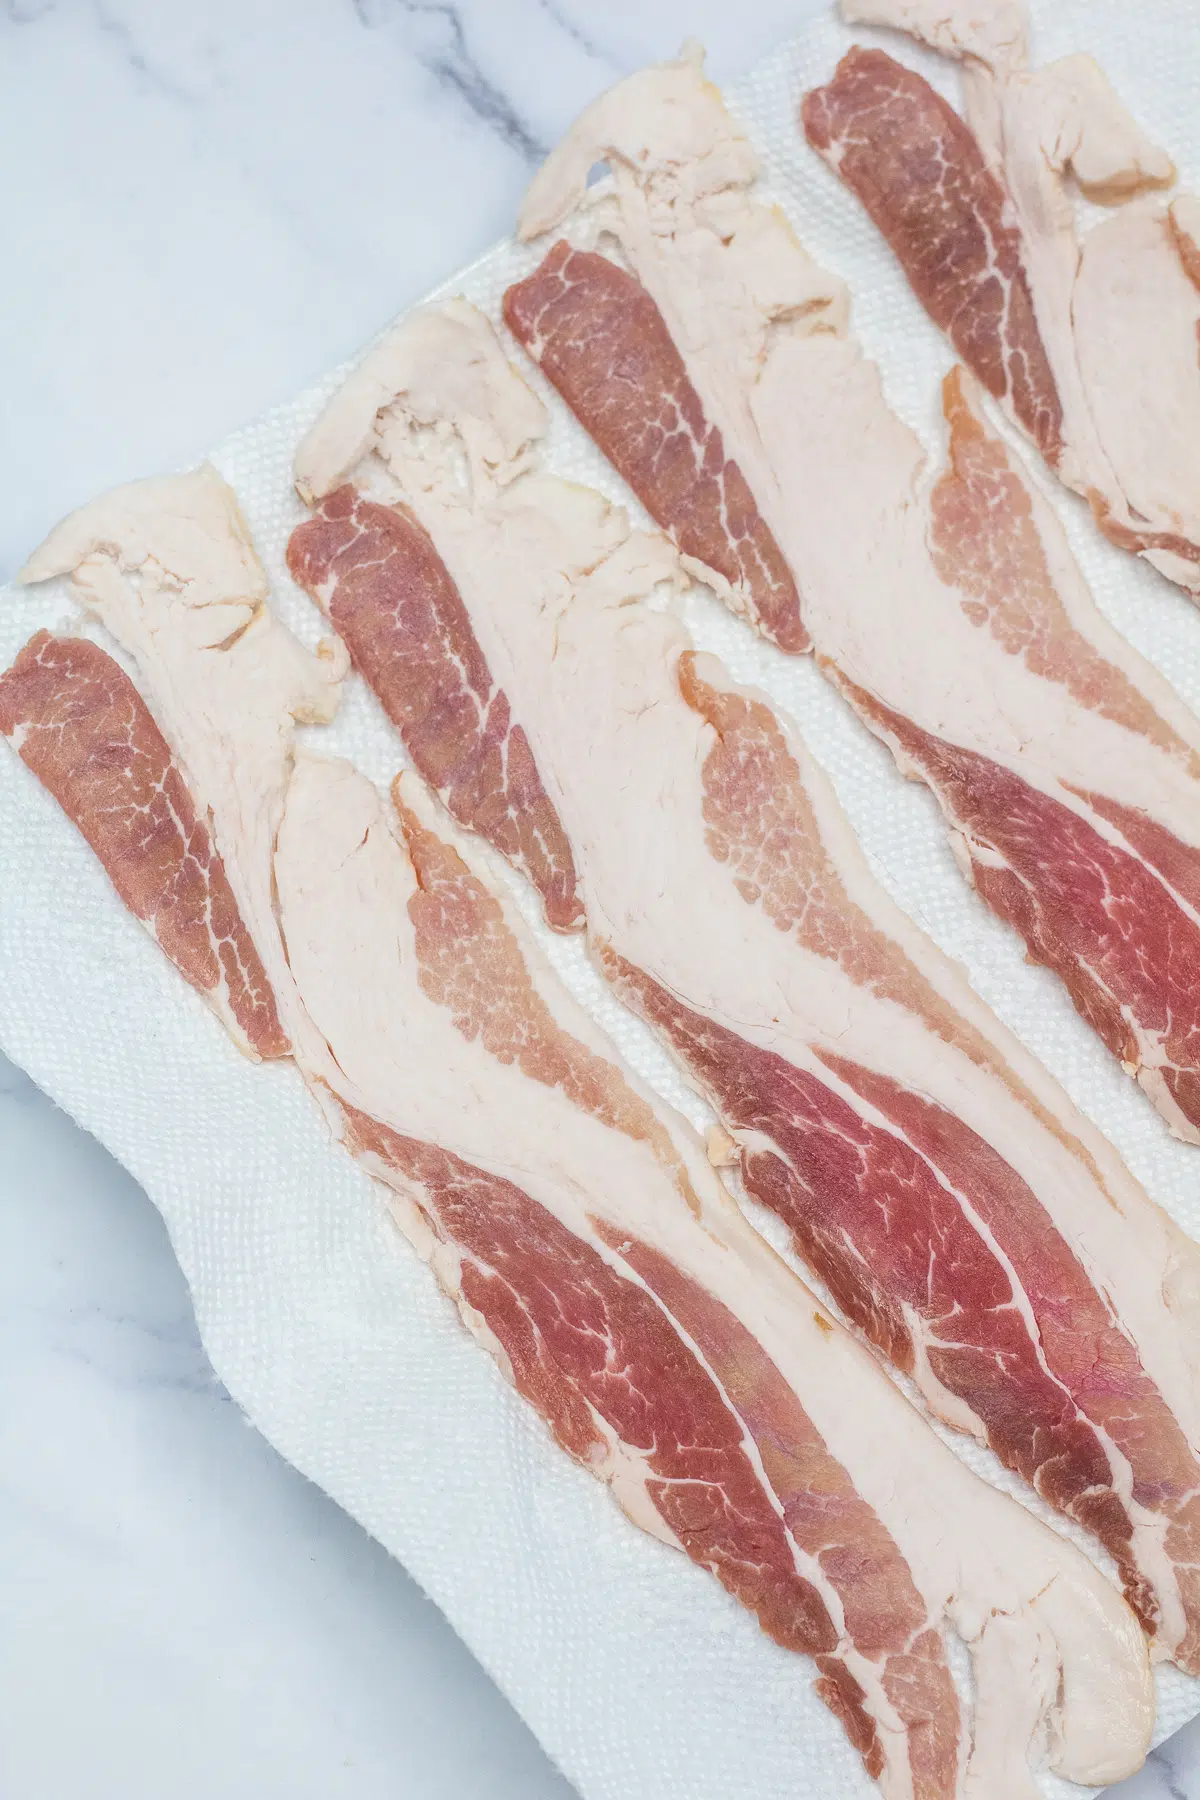 Process photo 1 of the thick-cut bacon slices arranged on plate.